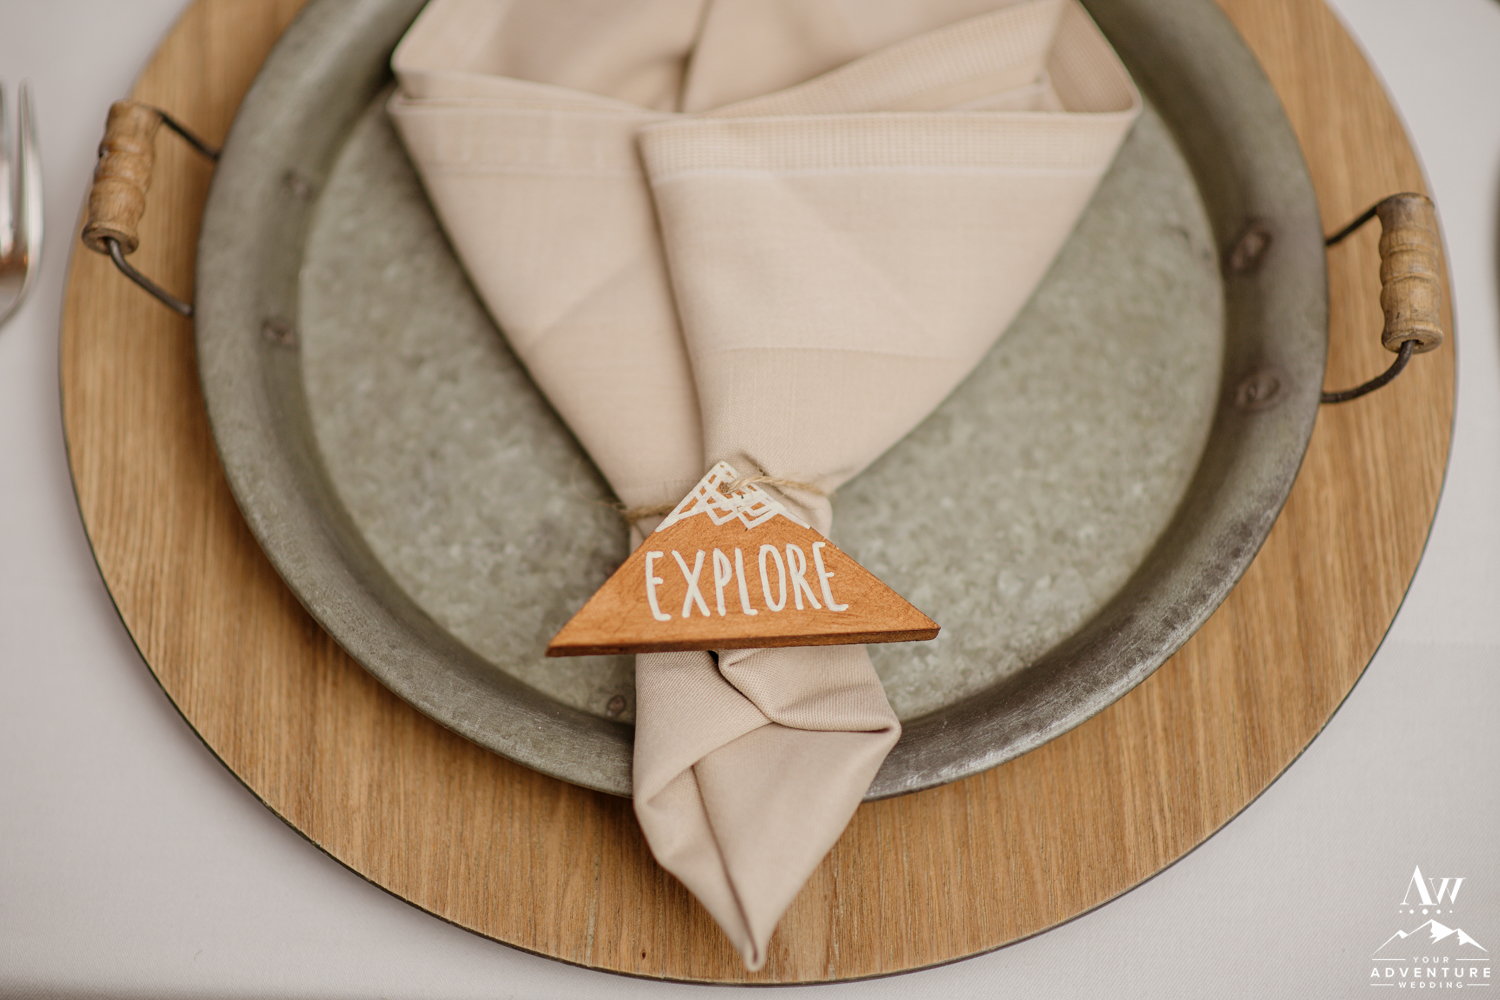 Explore Napkin Ring on top of charger plats